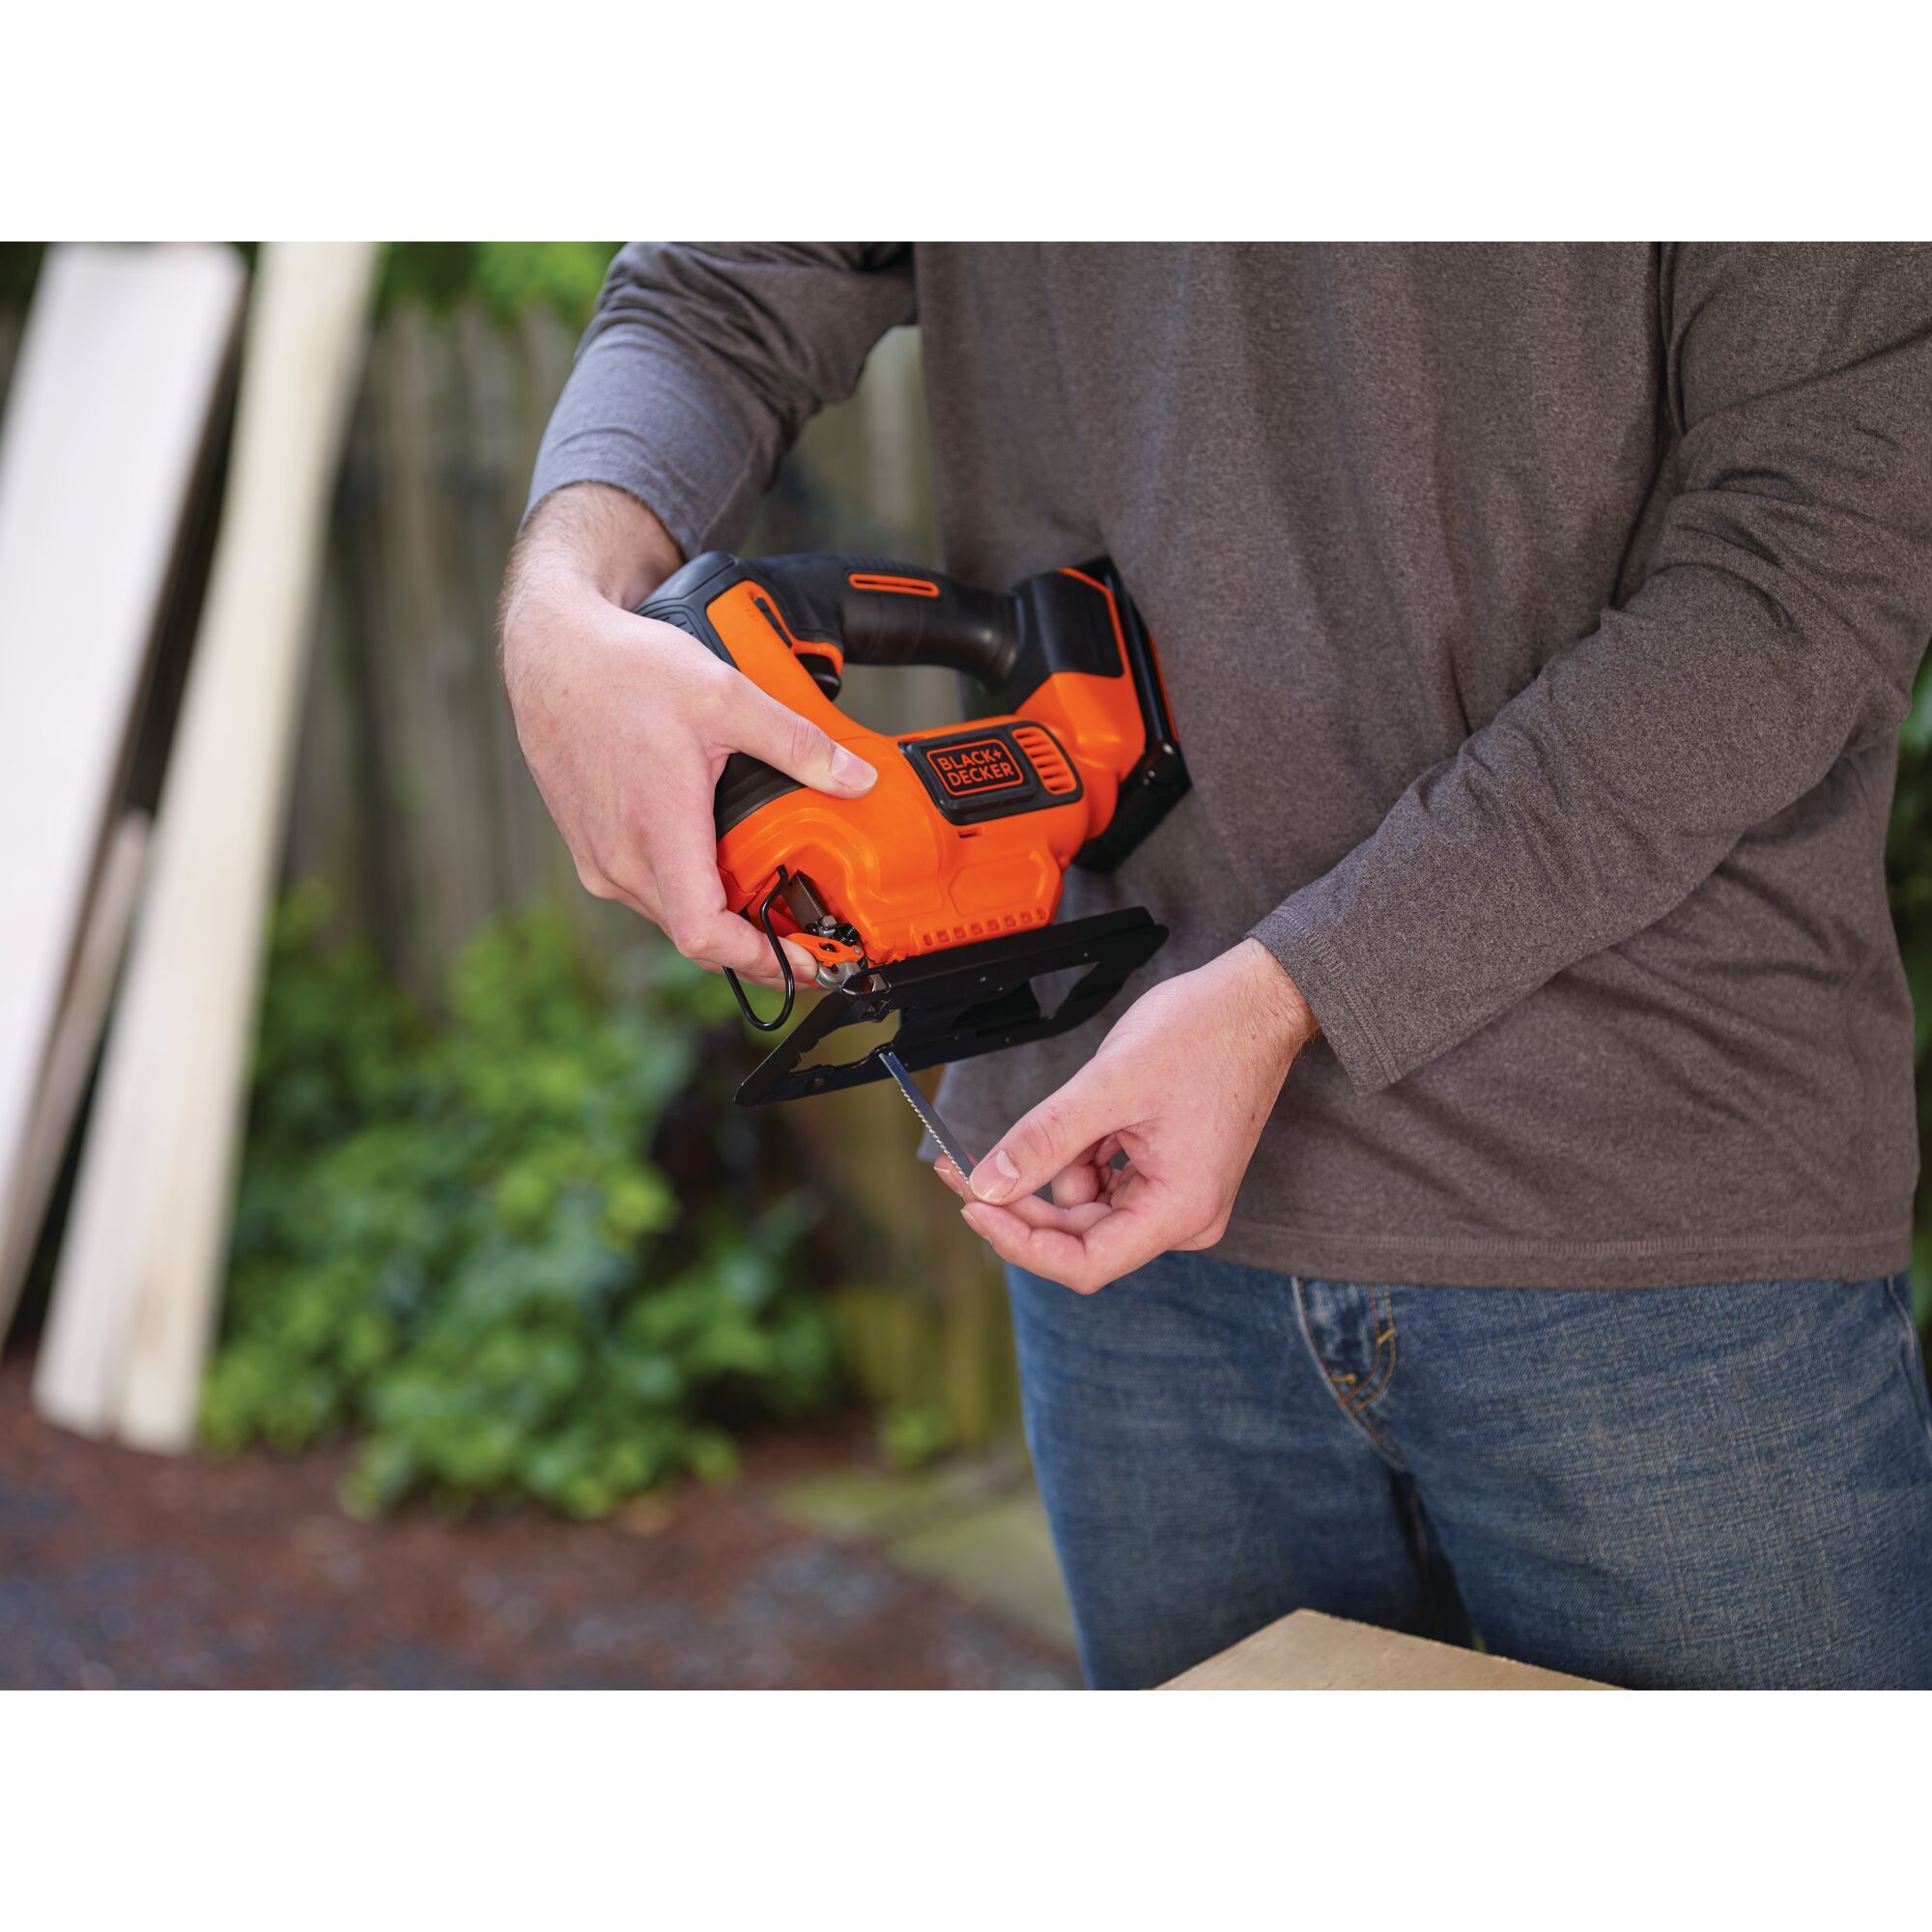 Tool free blade change feature of 20 volt MAX cordless jigsaw. 